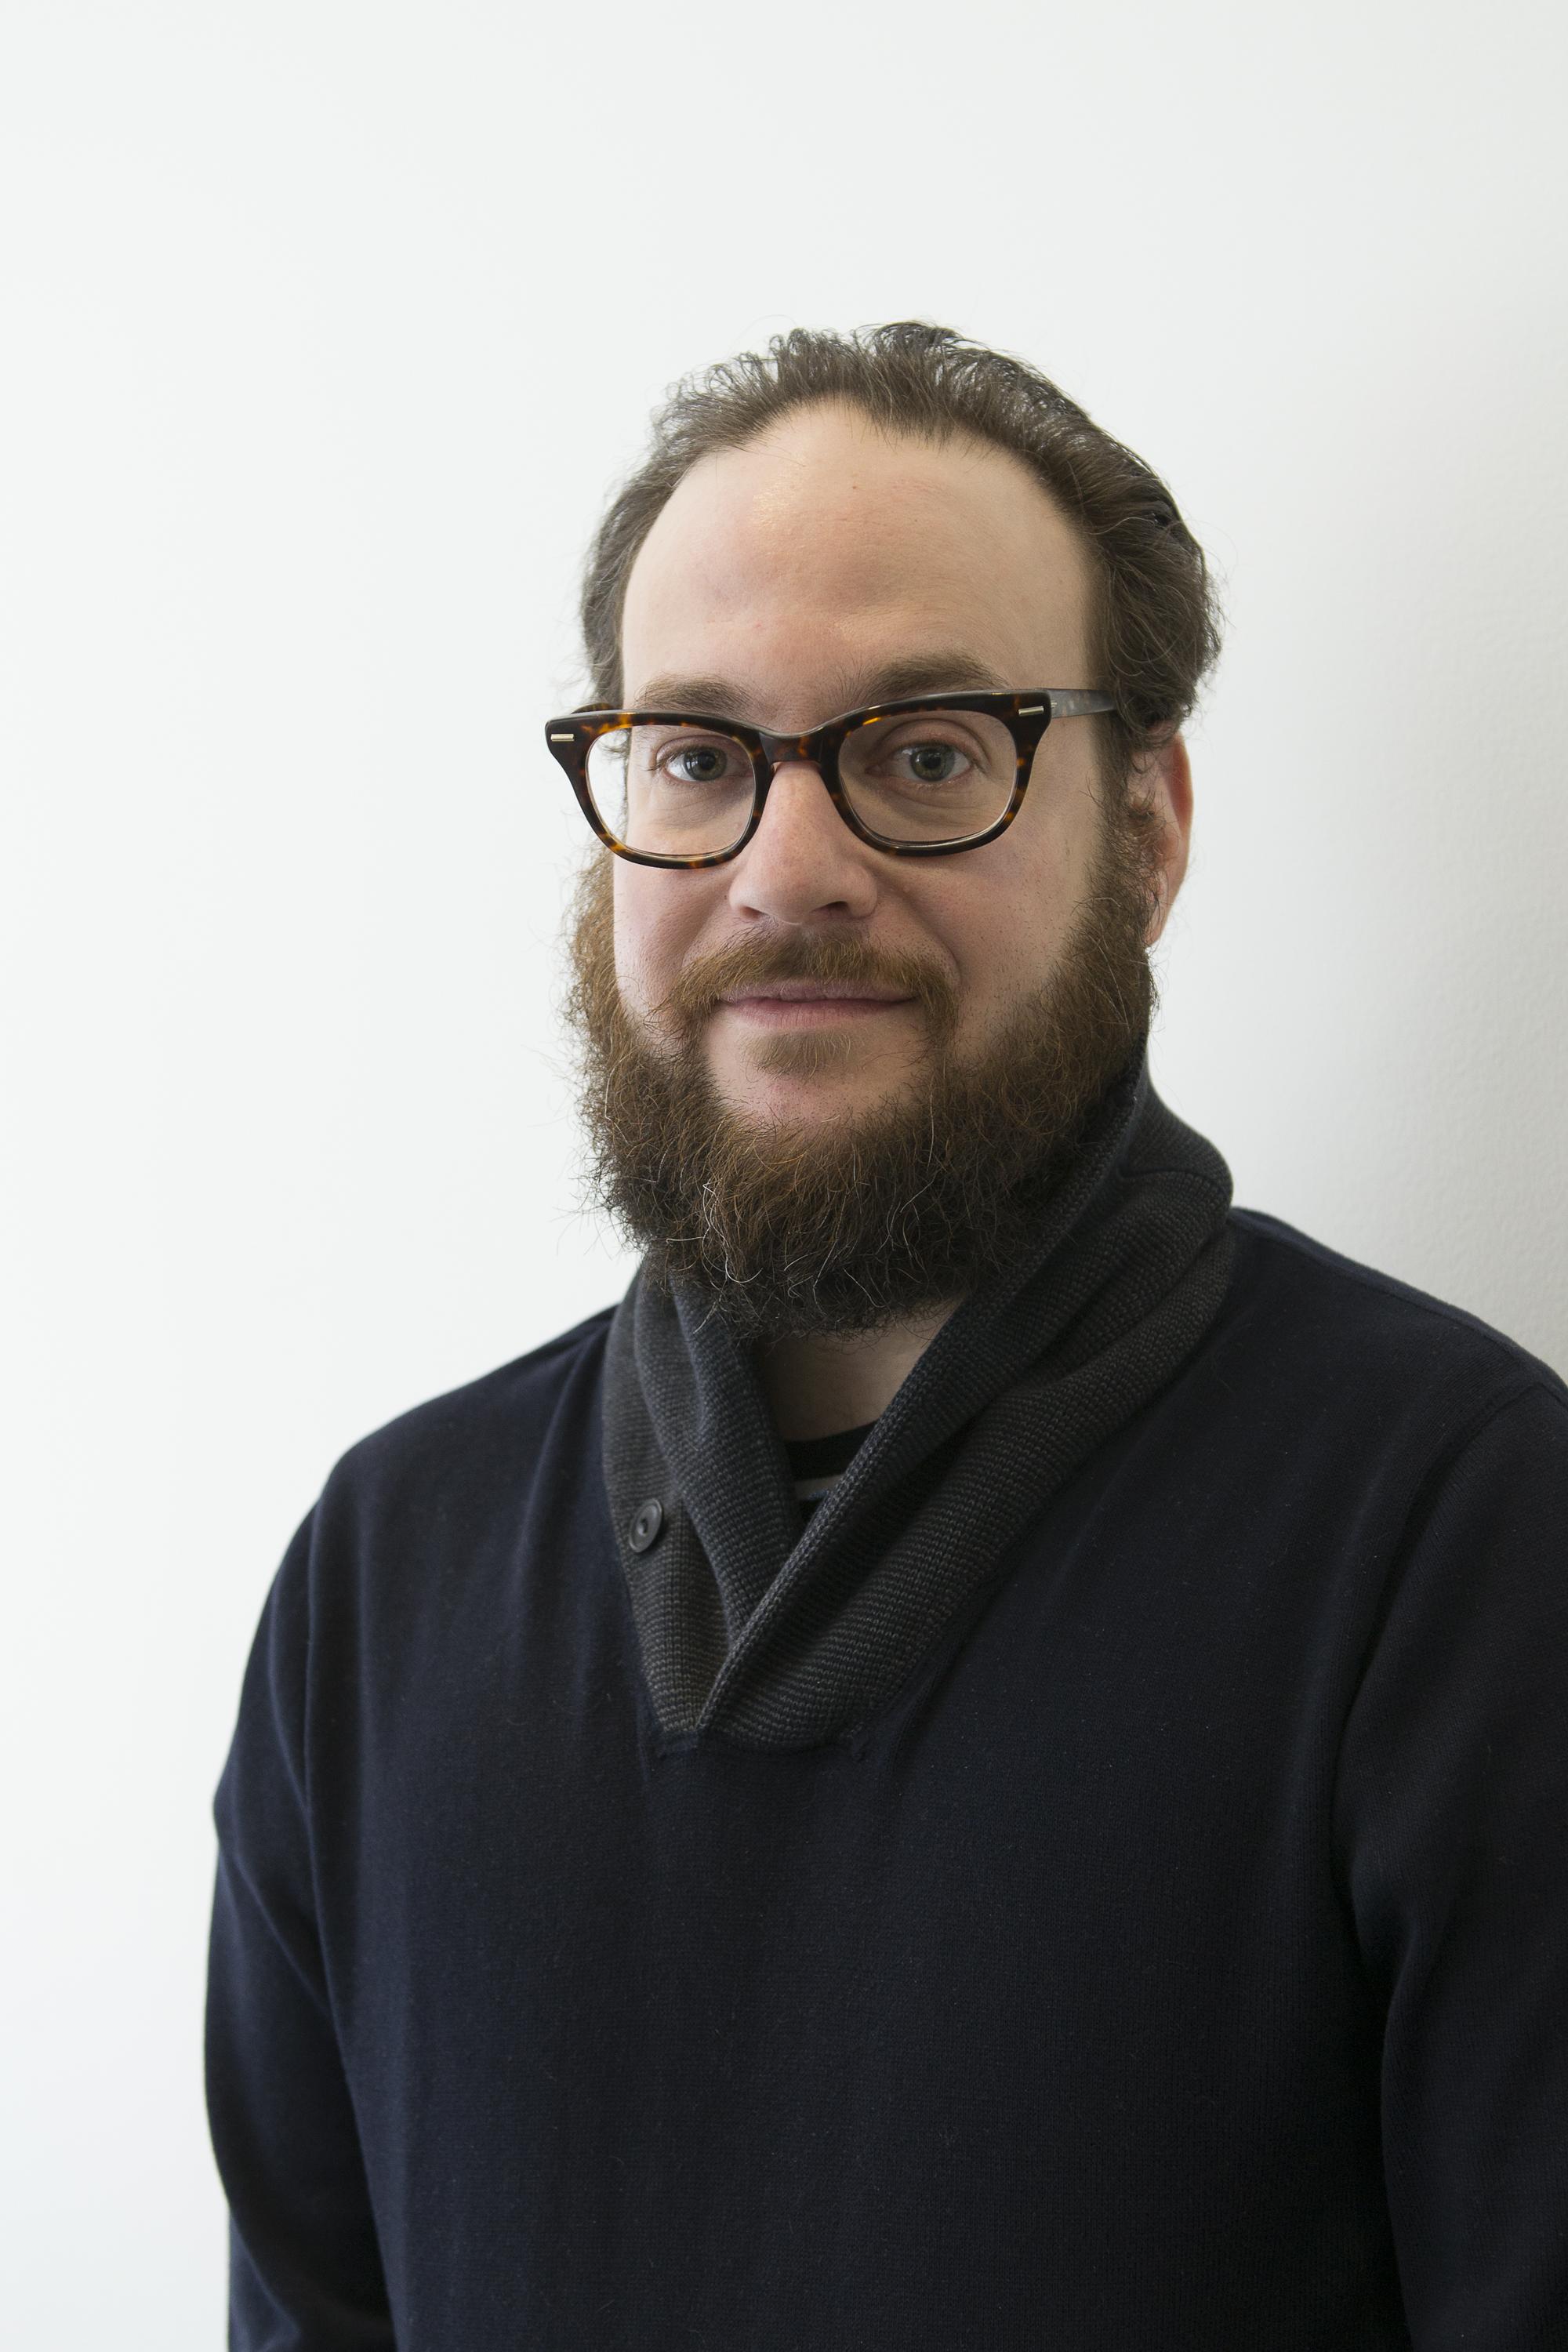 A portrait of a bearded man with glasses